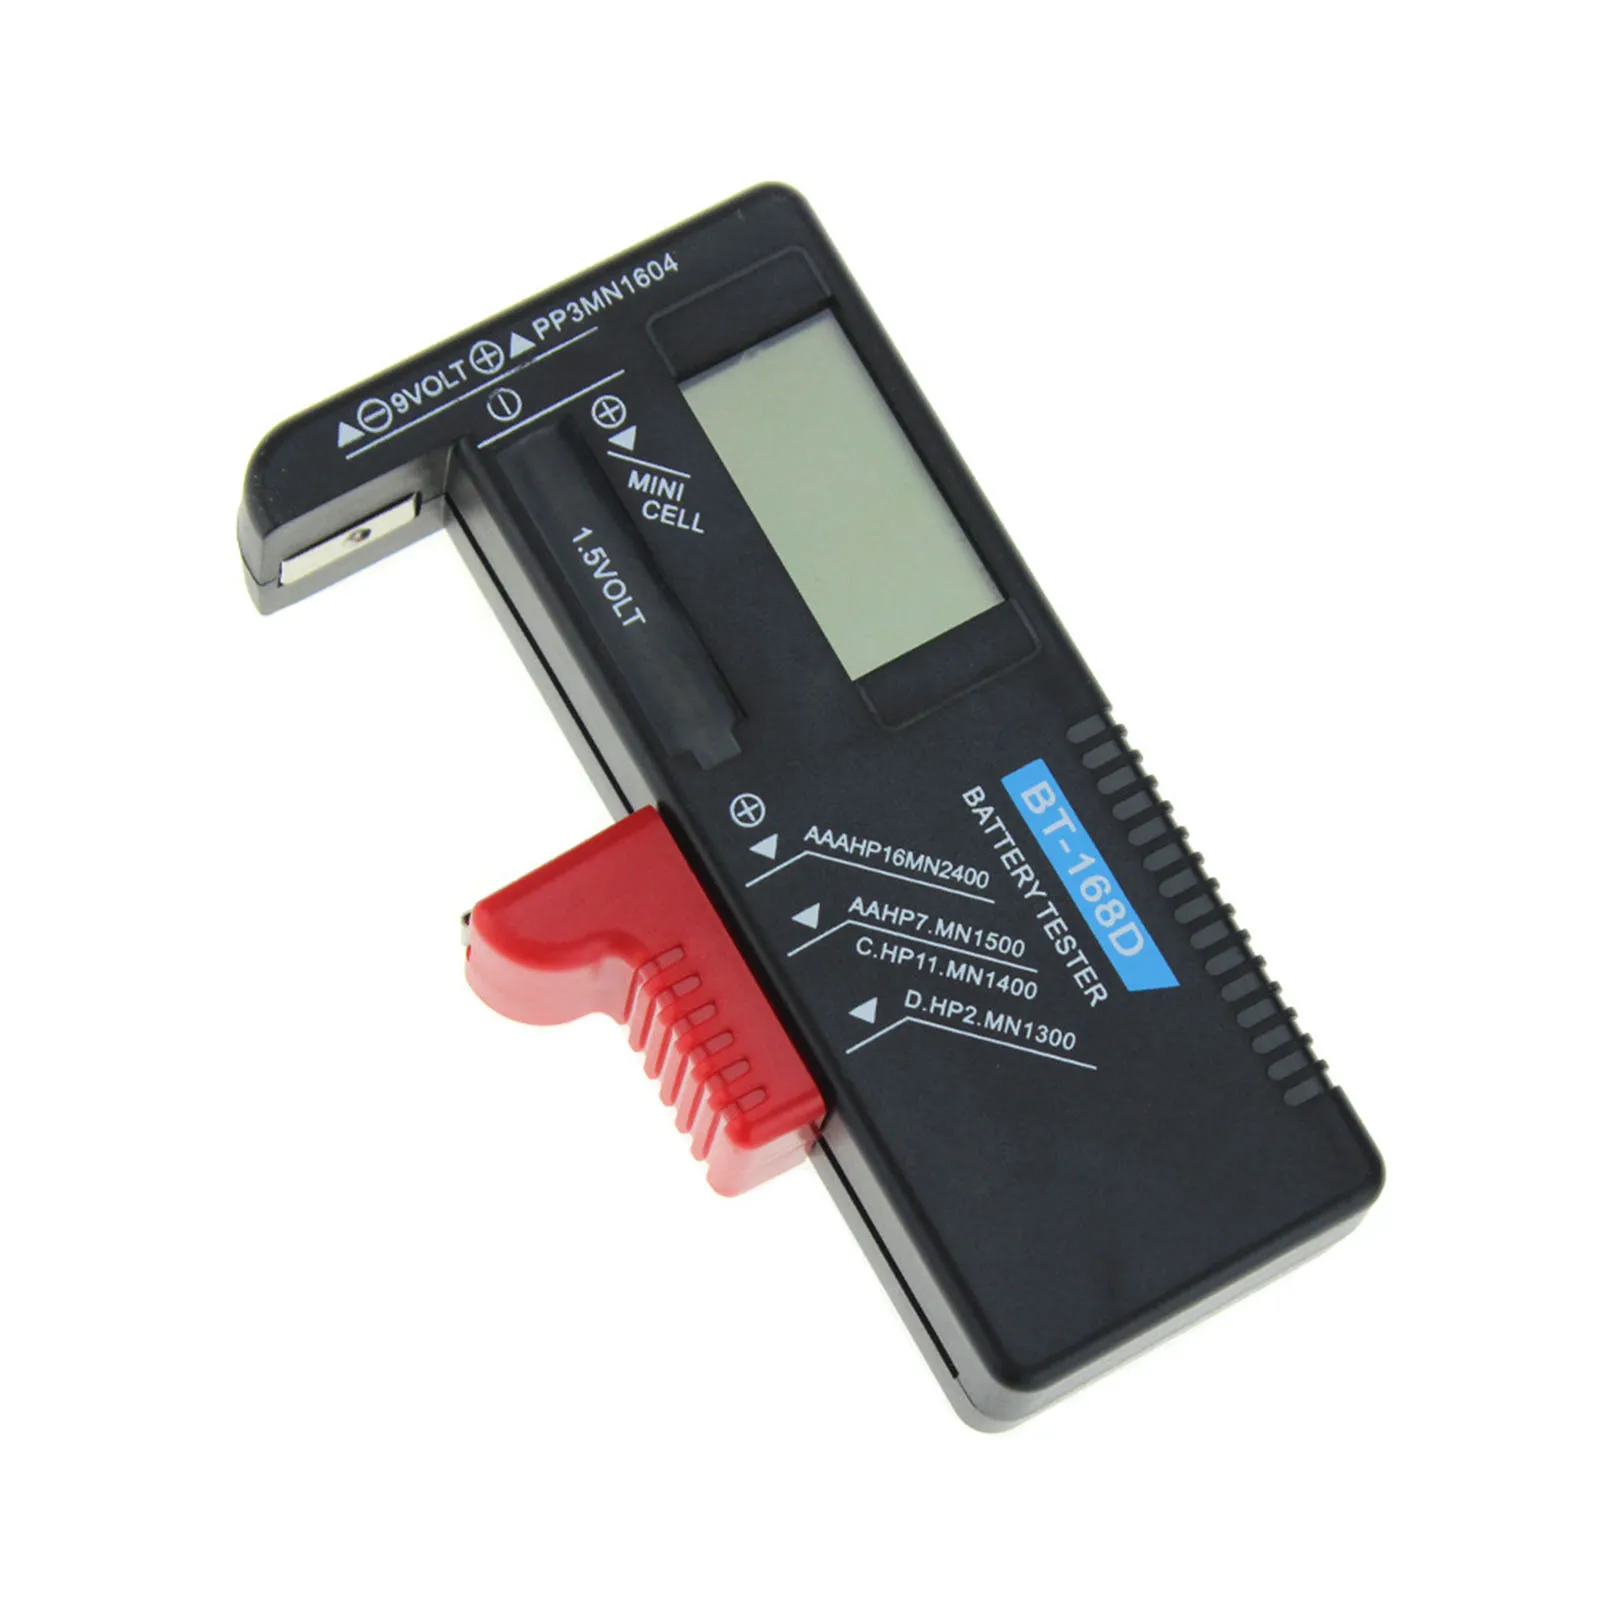 

Portable Battery Test Tool Battery Capacity Power Level Measuring Universal AA AAA Batteries 9V BT168D